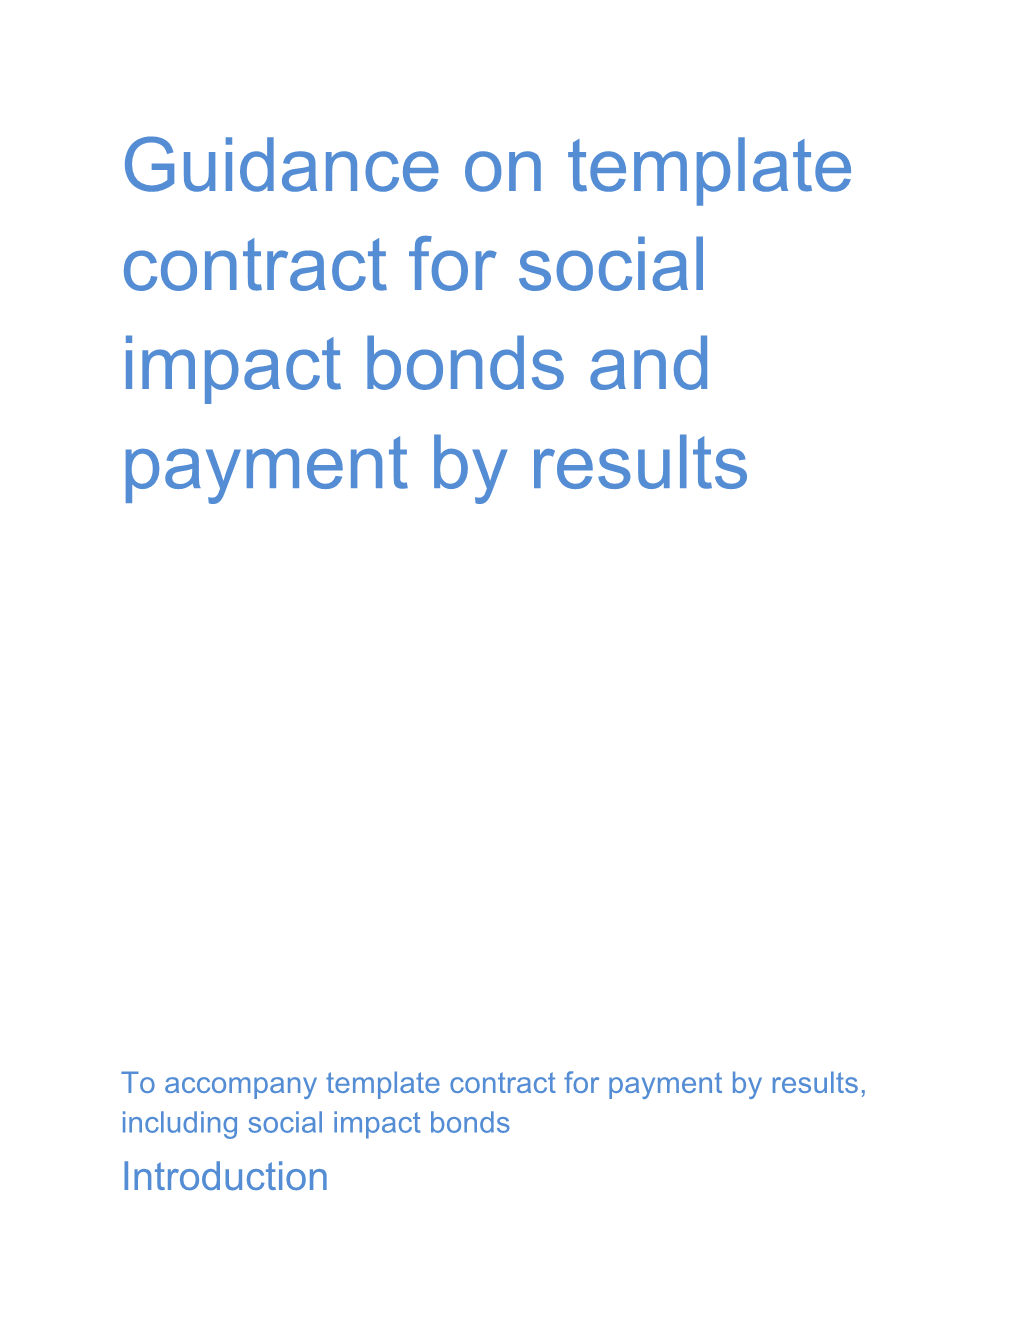 Guidance on Template Contract for Social Impact Bonds and Payment by Results